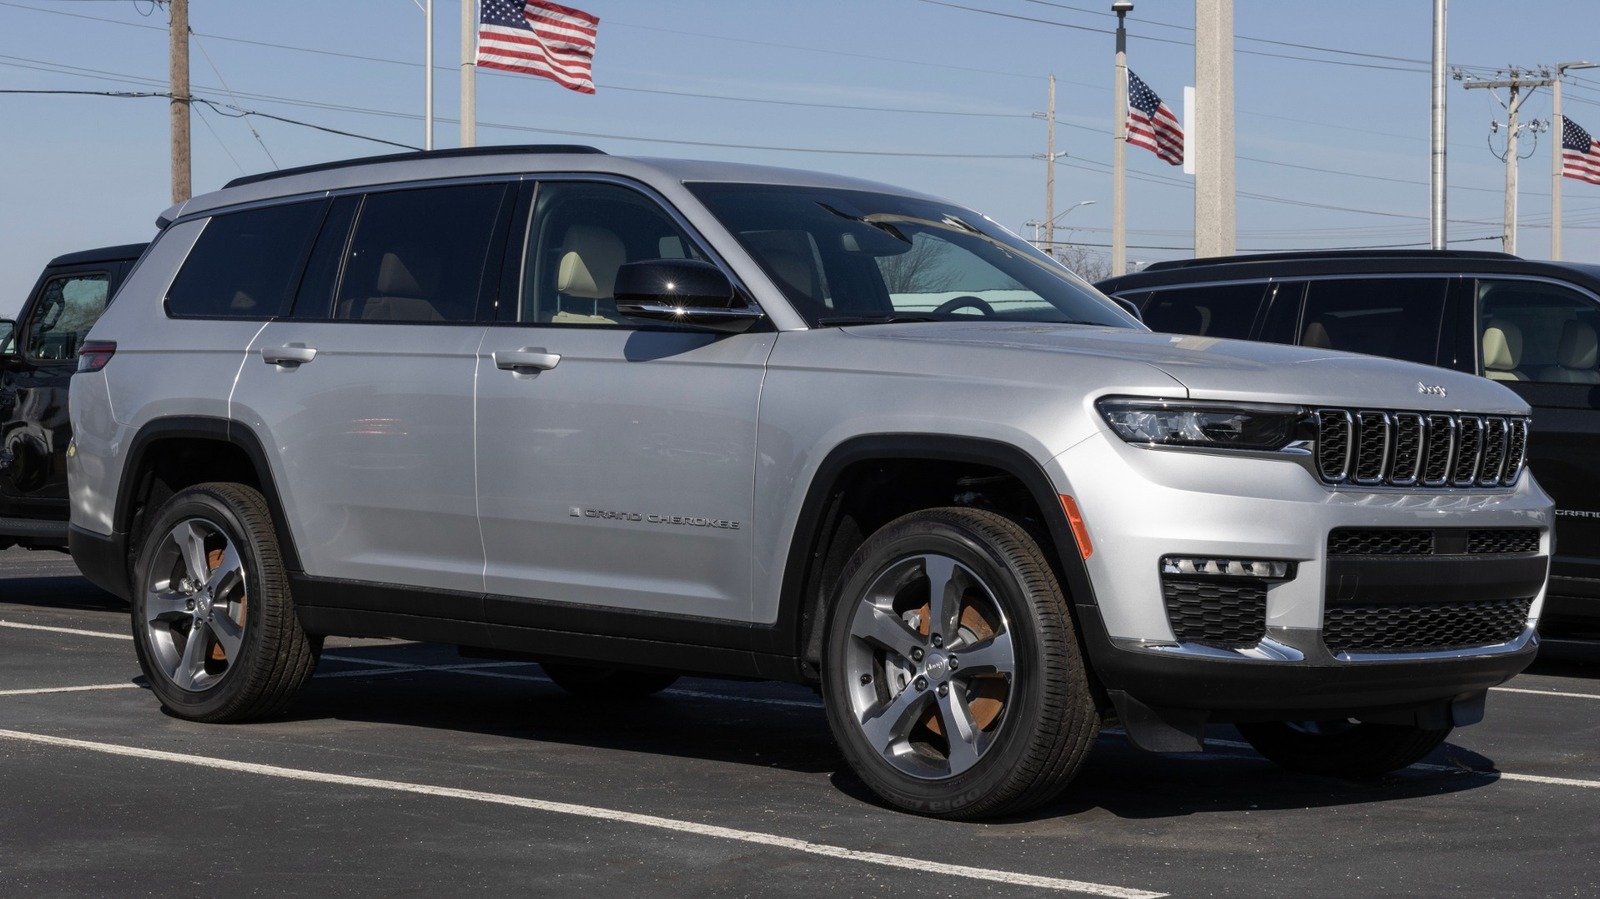 Jeep Grand Cherokee Limited Vs. Overland: What's The Difference?